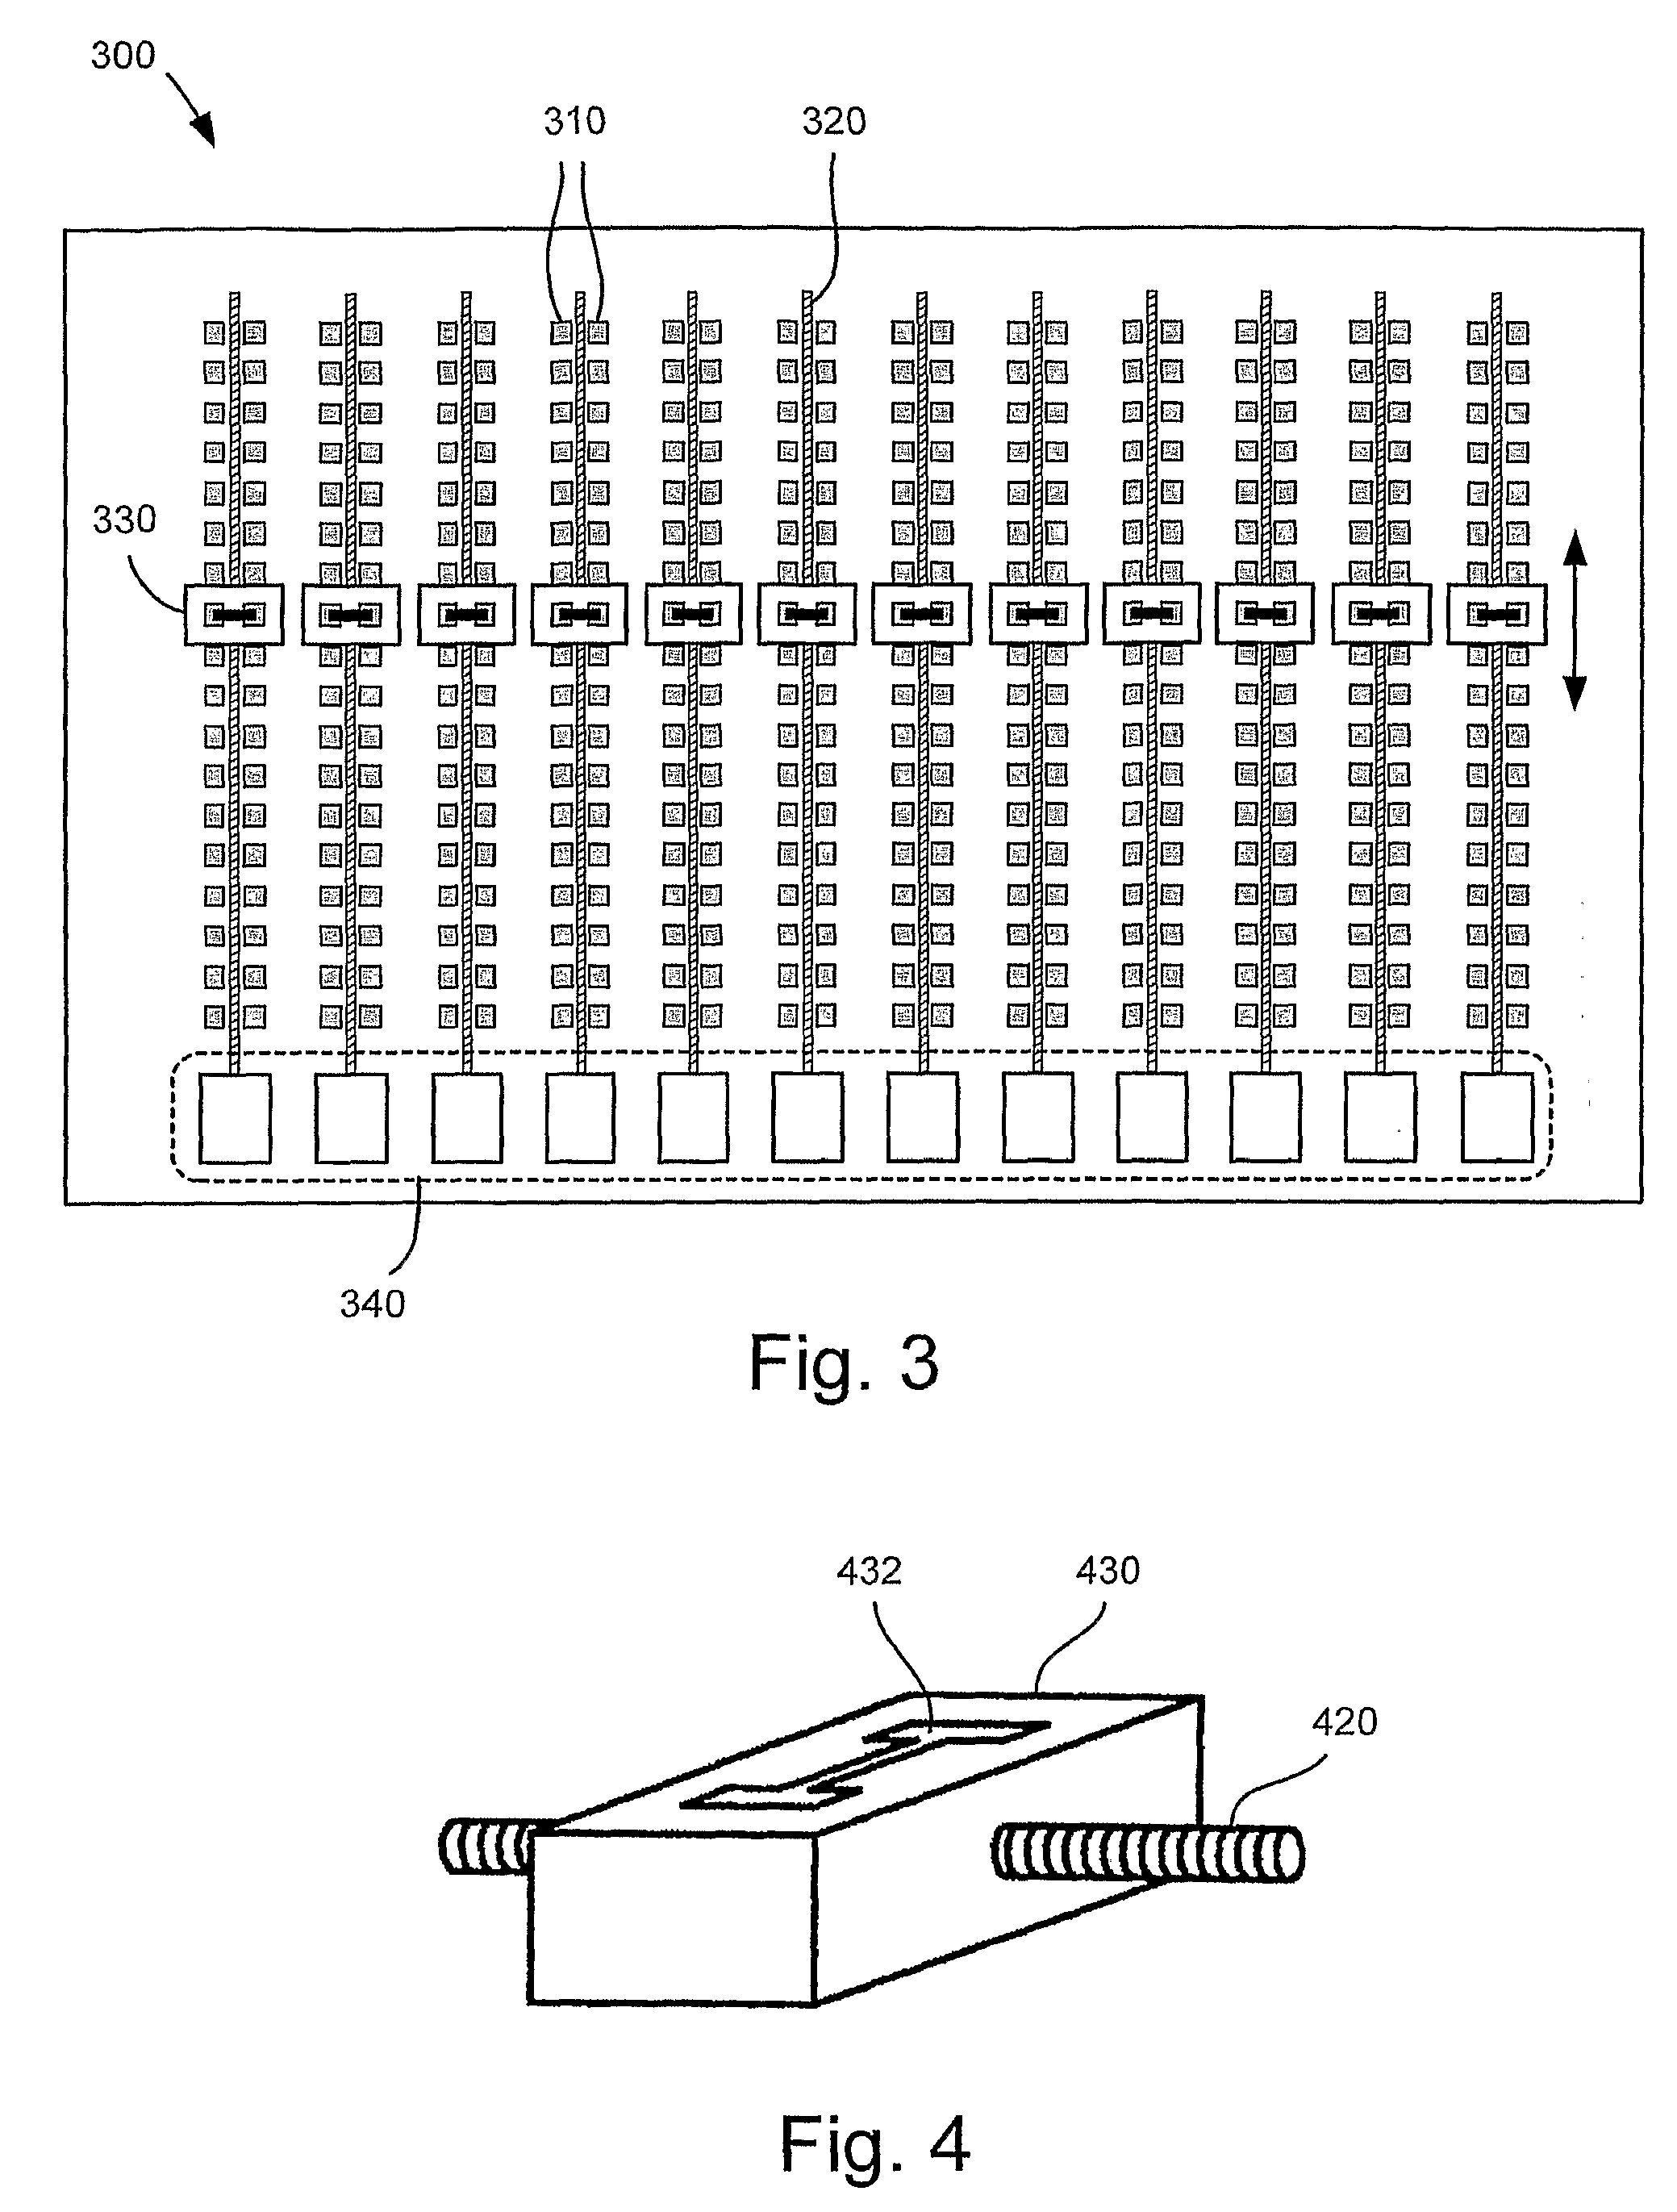 Method and System for Scanning and Detecting Metallic Cross-Connects